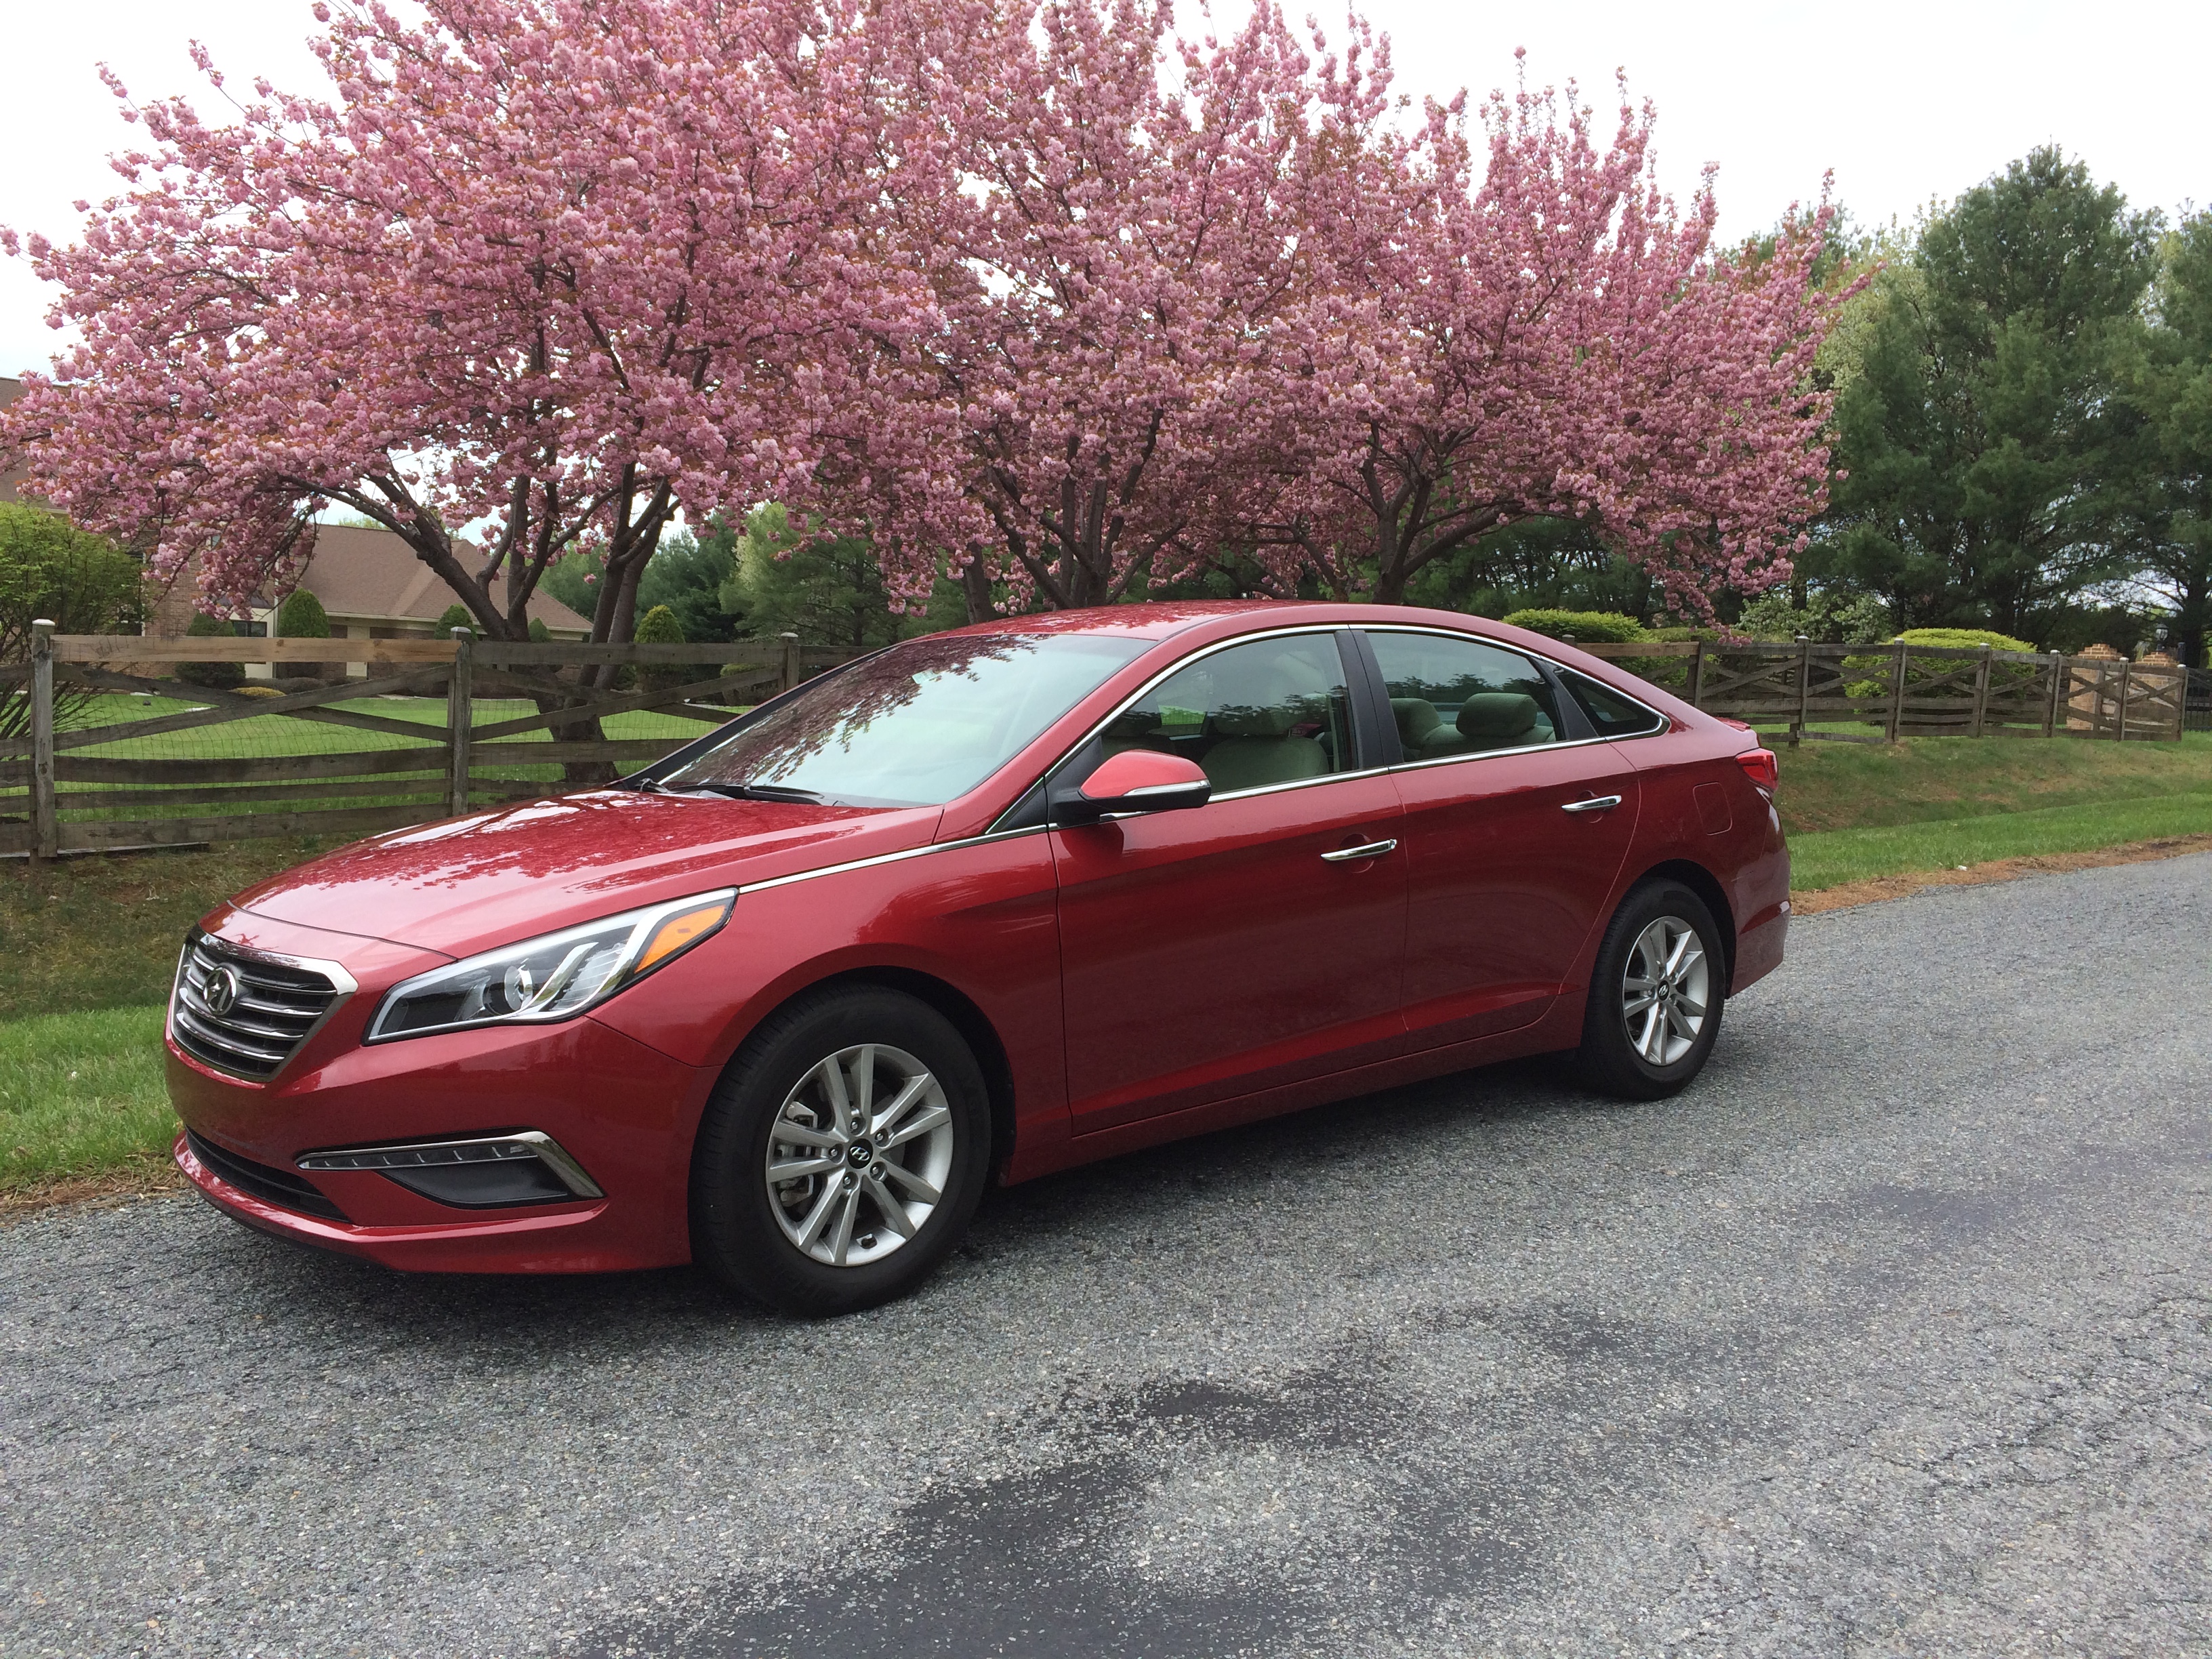 Hyundai adds thrifty Sonata Eco that’s peppy, fun to drive